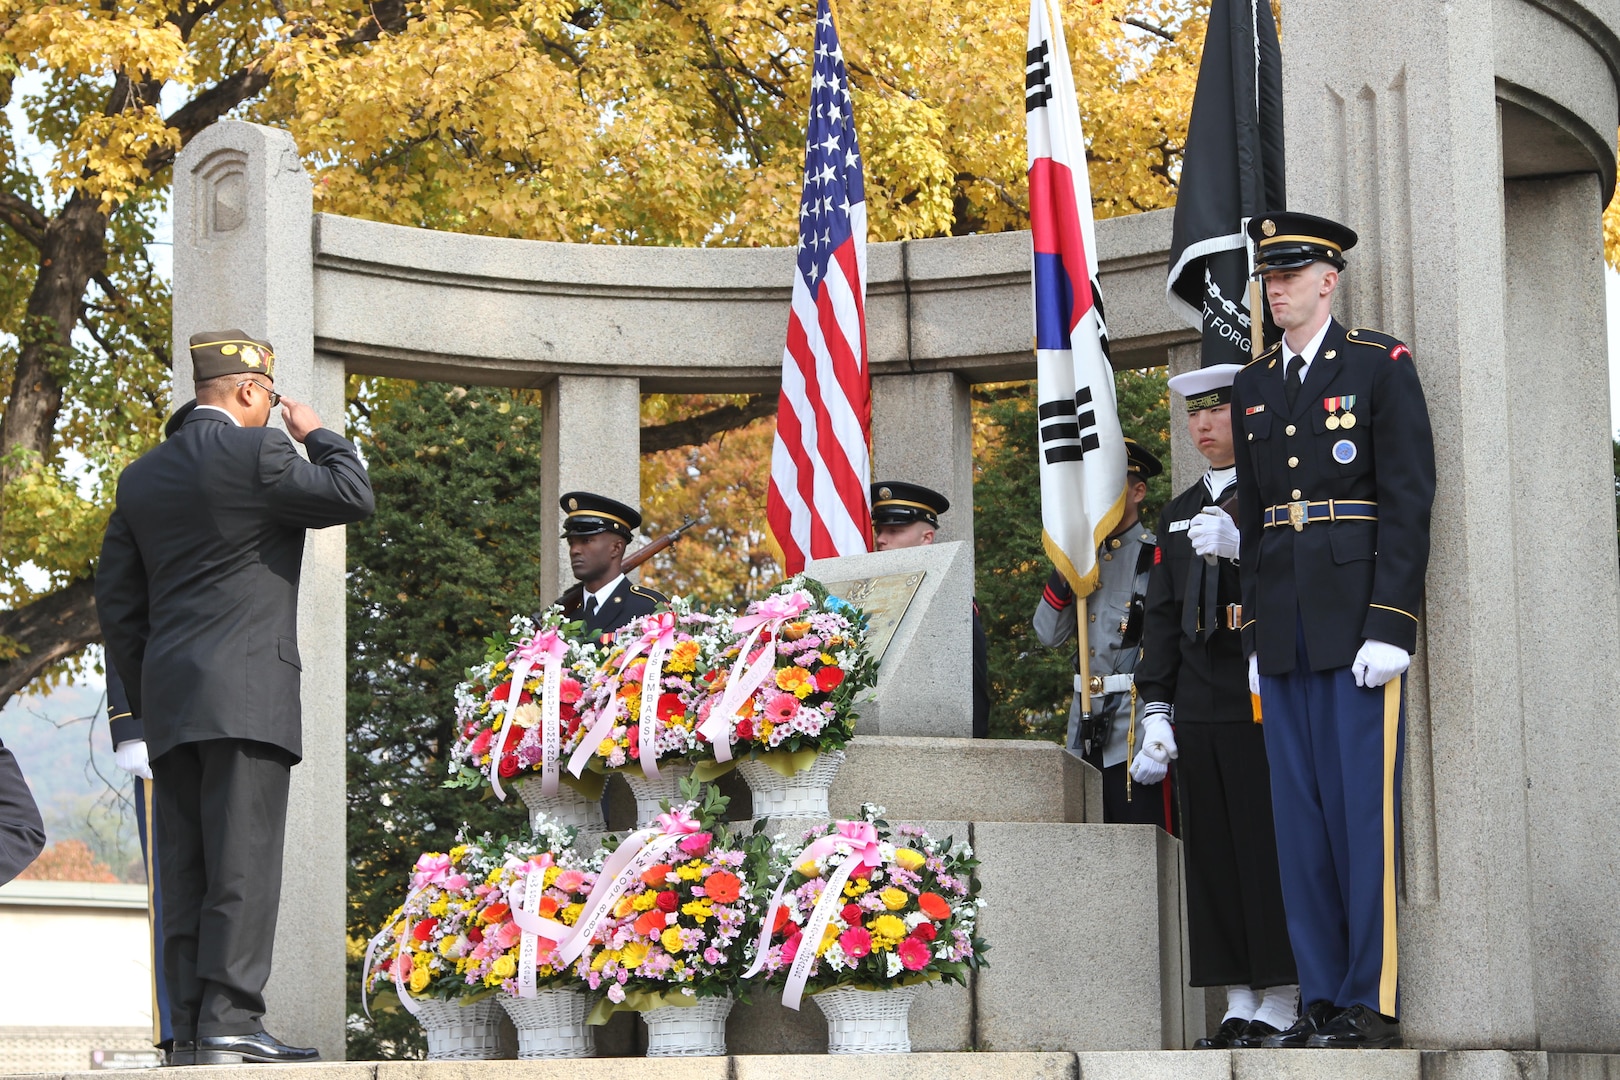 A war veteran from the Veterans of Foreign Wars salutes and pays respect to war veterans for their service during the Veterans Day ceremony at the Eighth Army Memorial, Yongsan, Republic of Korea, Nov. 11, 2016.